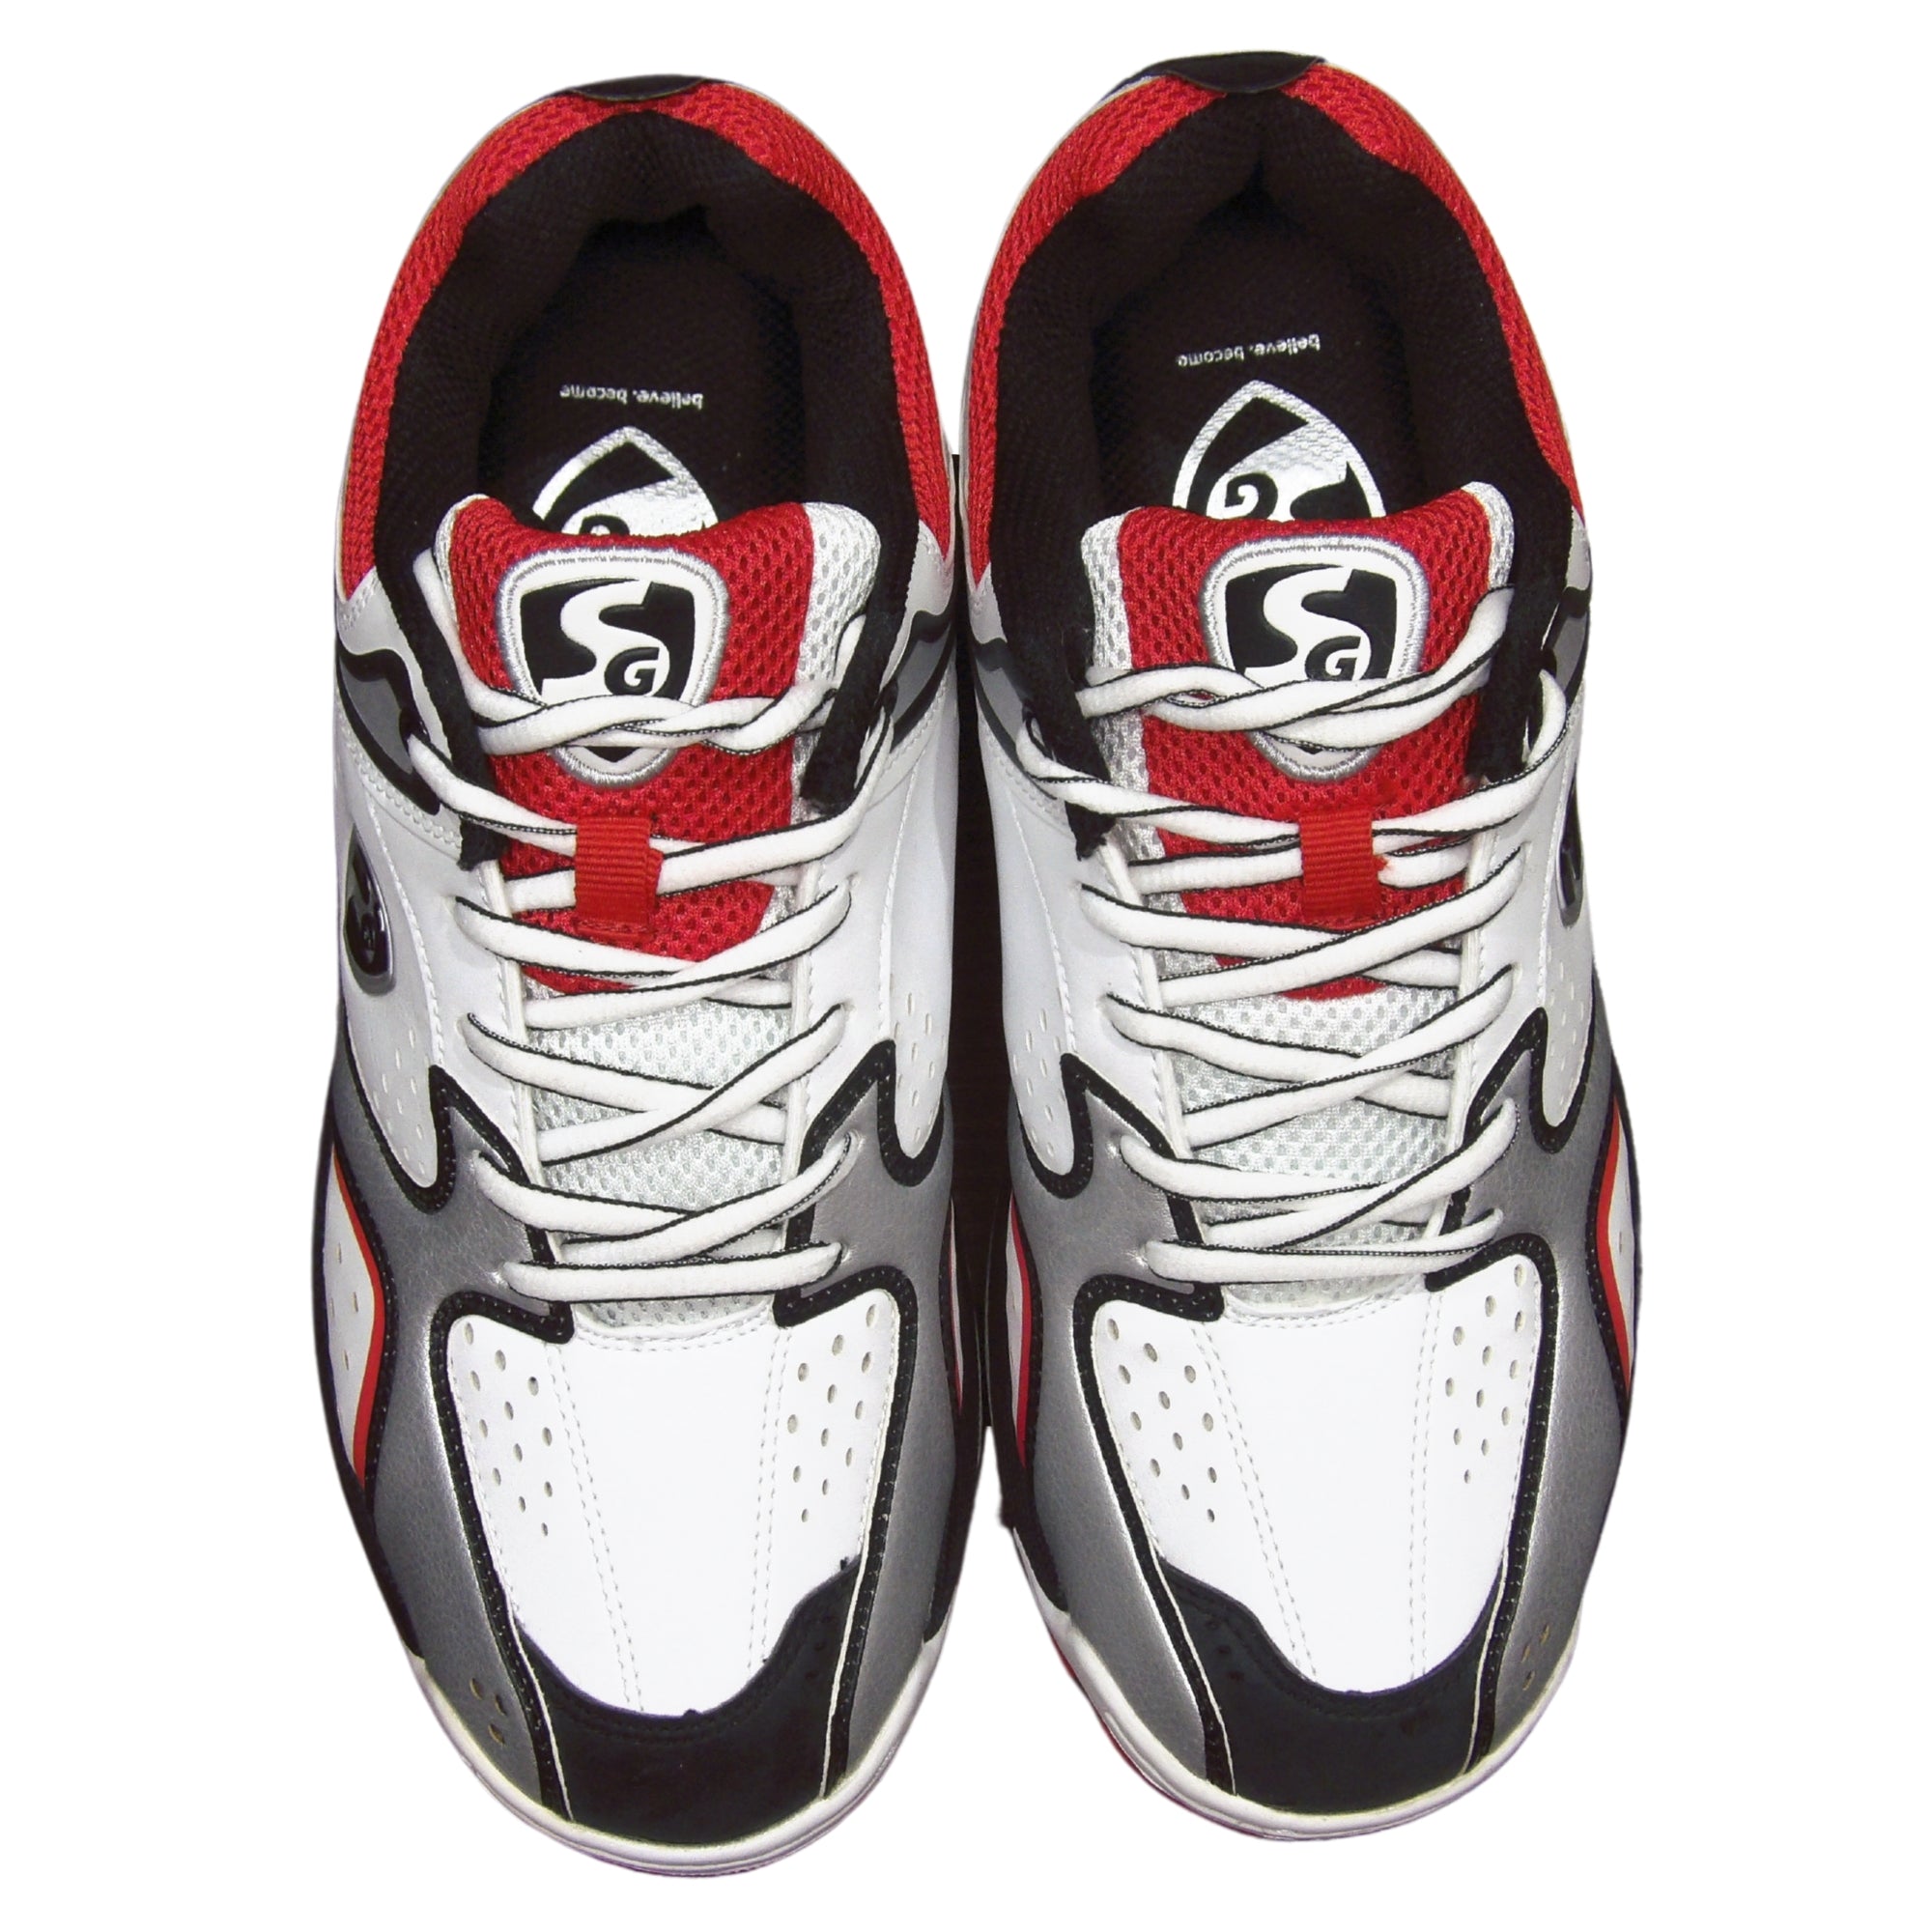 SG Cricket Shoes, Model Striker II - White/Silver/Red